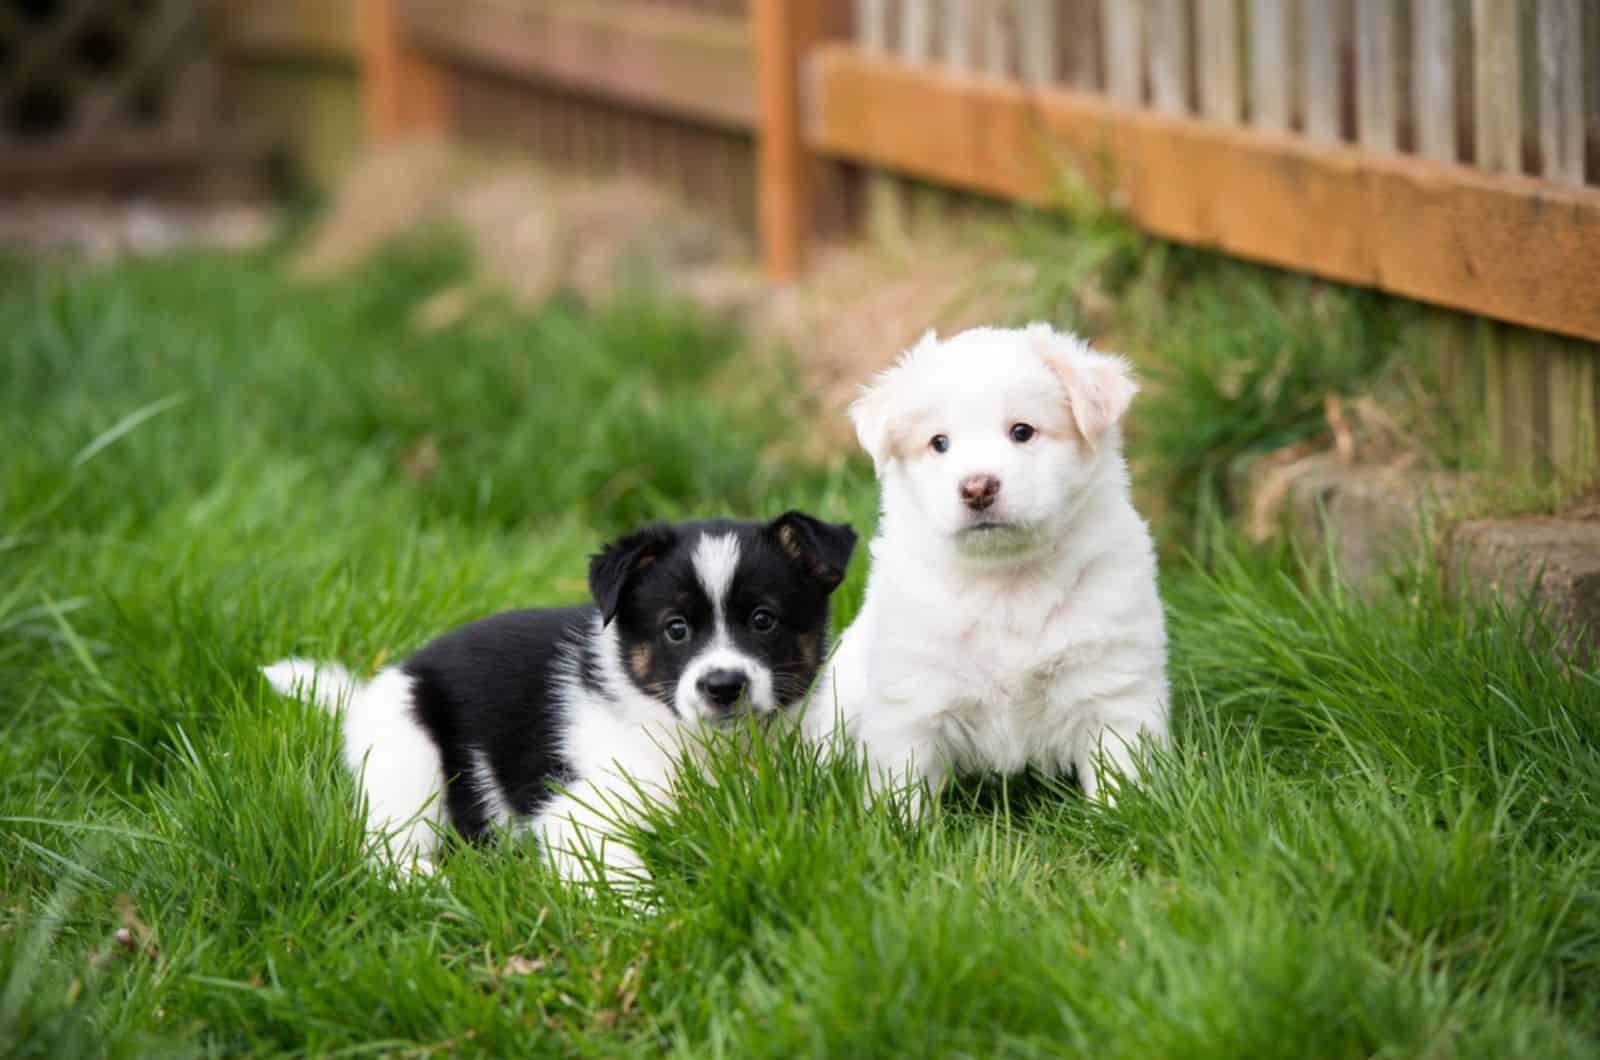 Two Small Fluffy Puppies Playing Outside on Green Grass